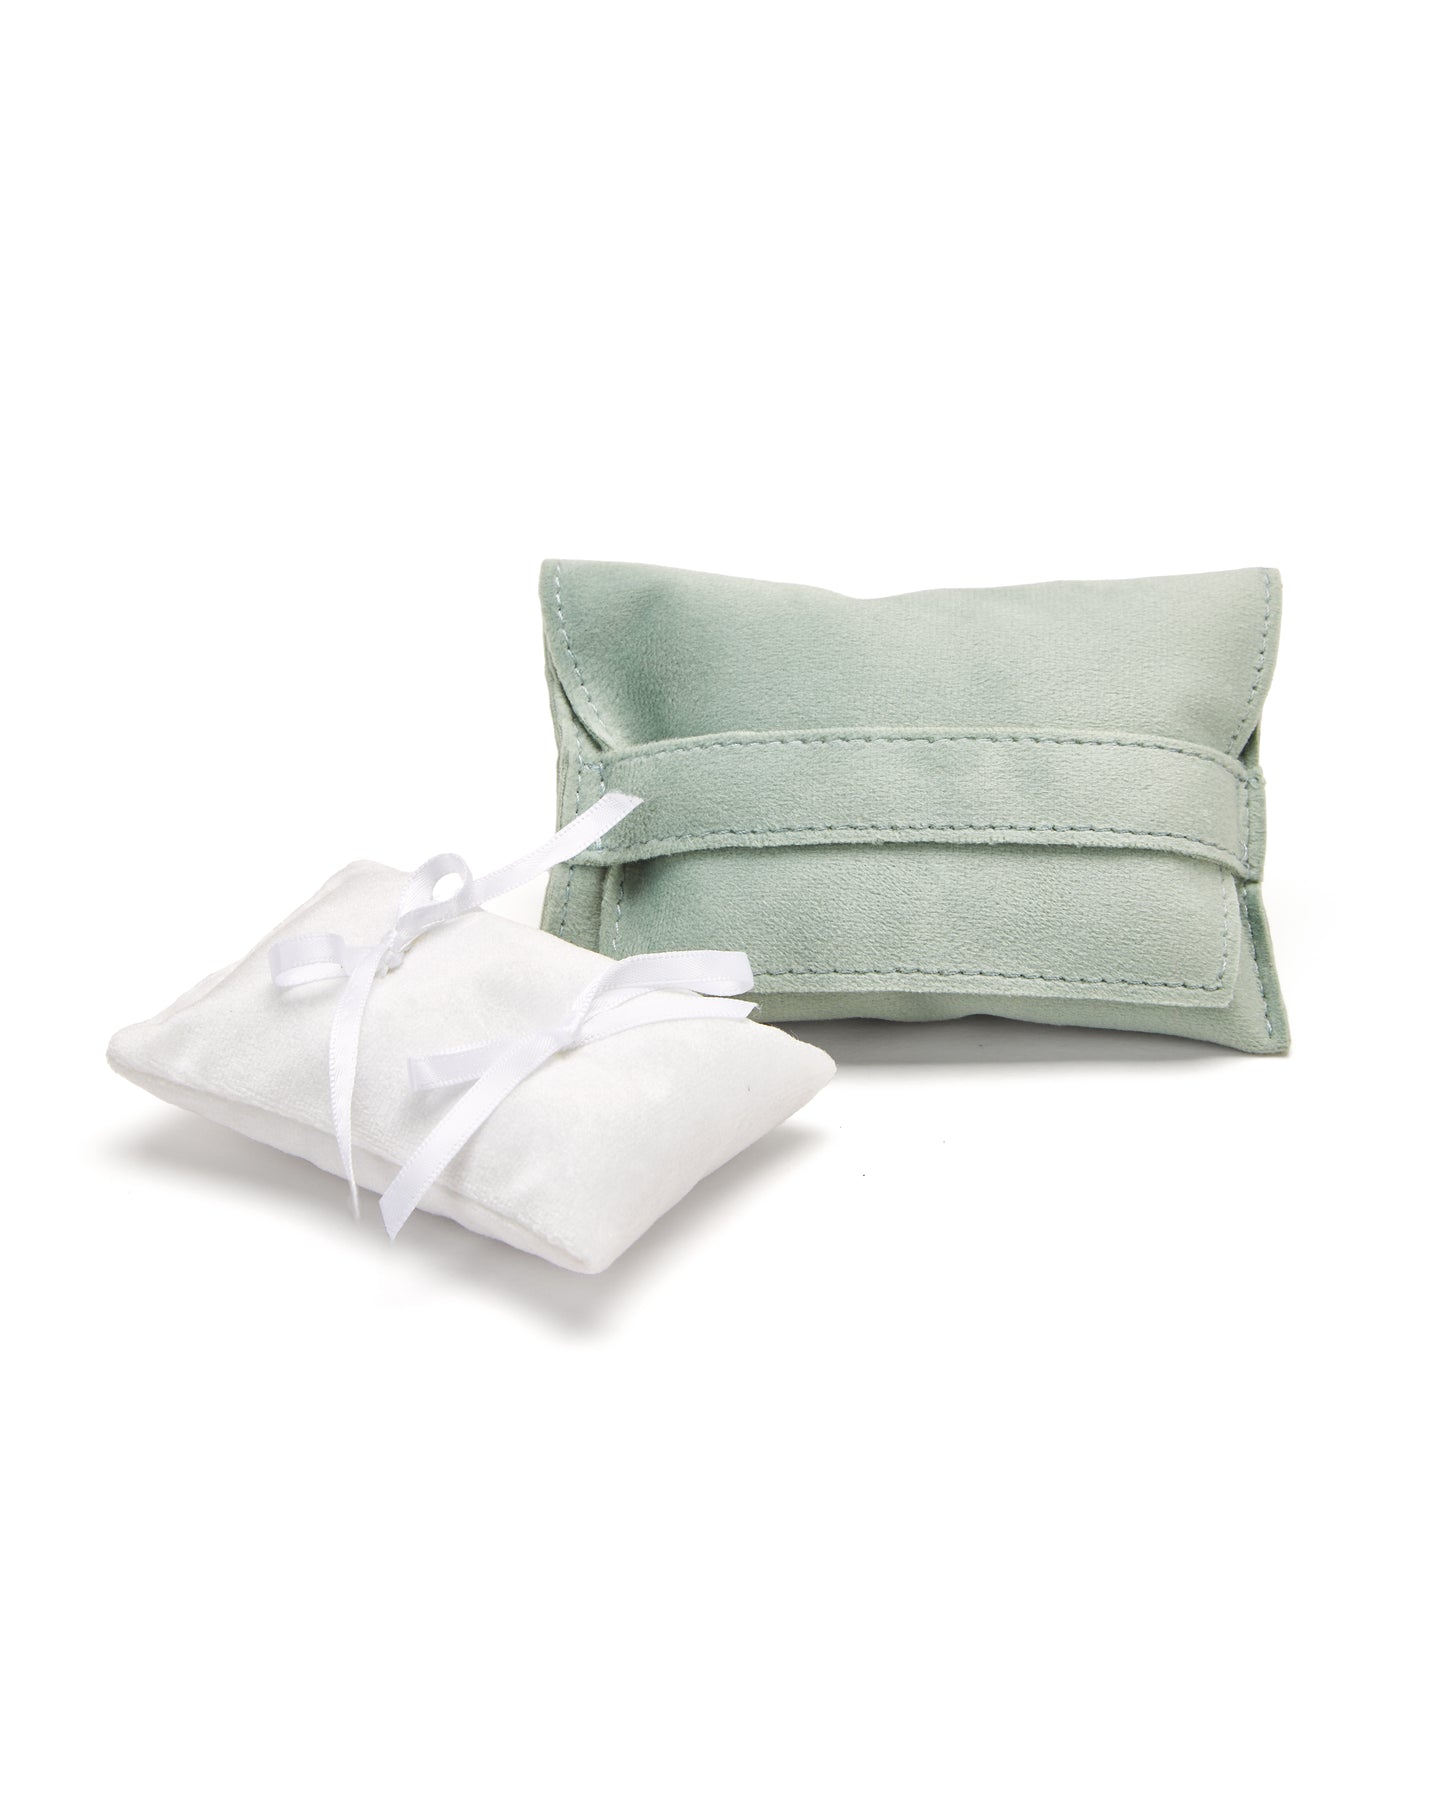 RING BEARER PILLOW with pouch, 50 pieces